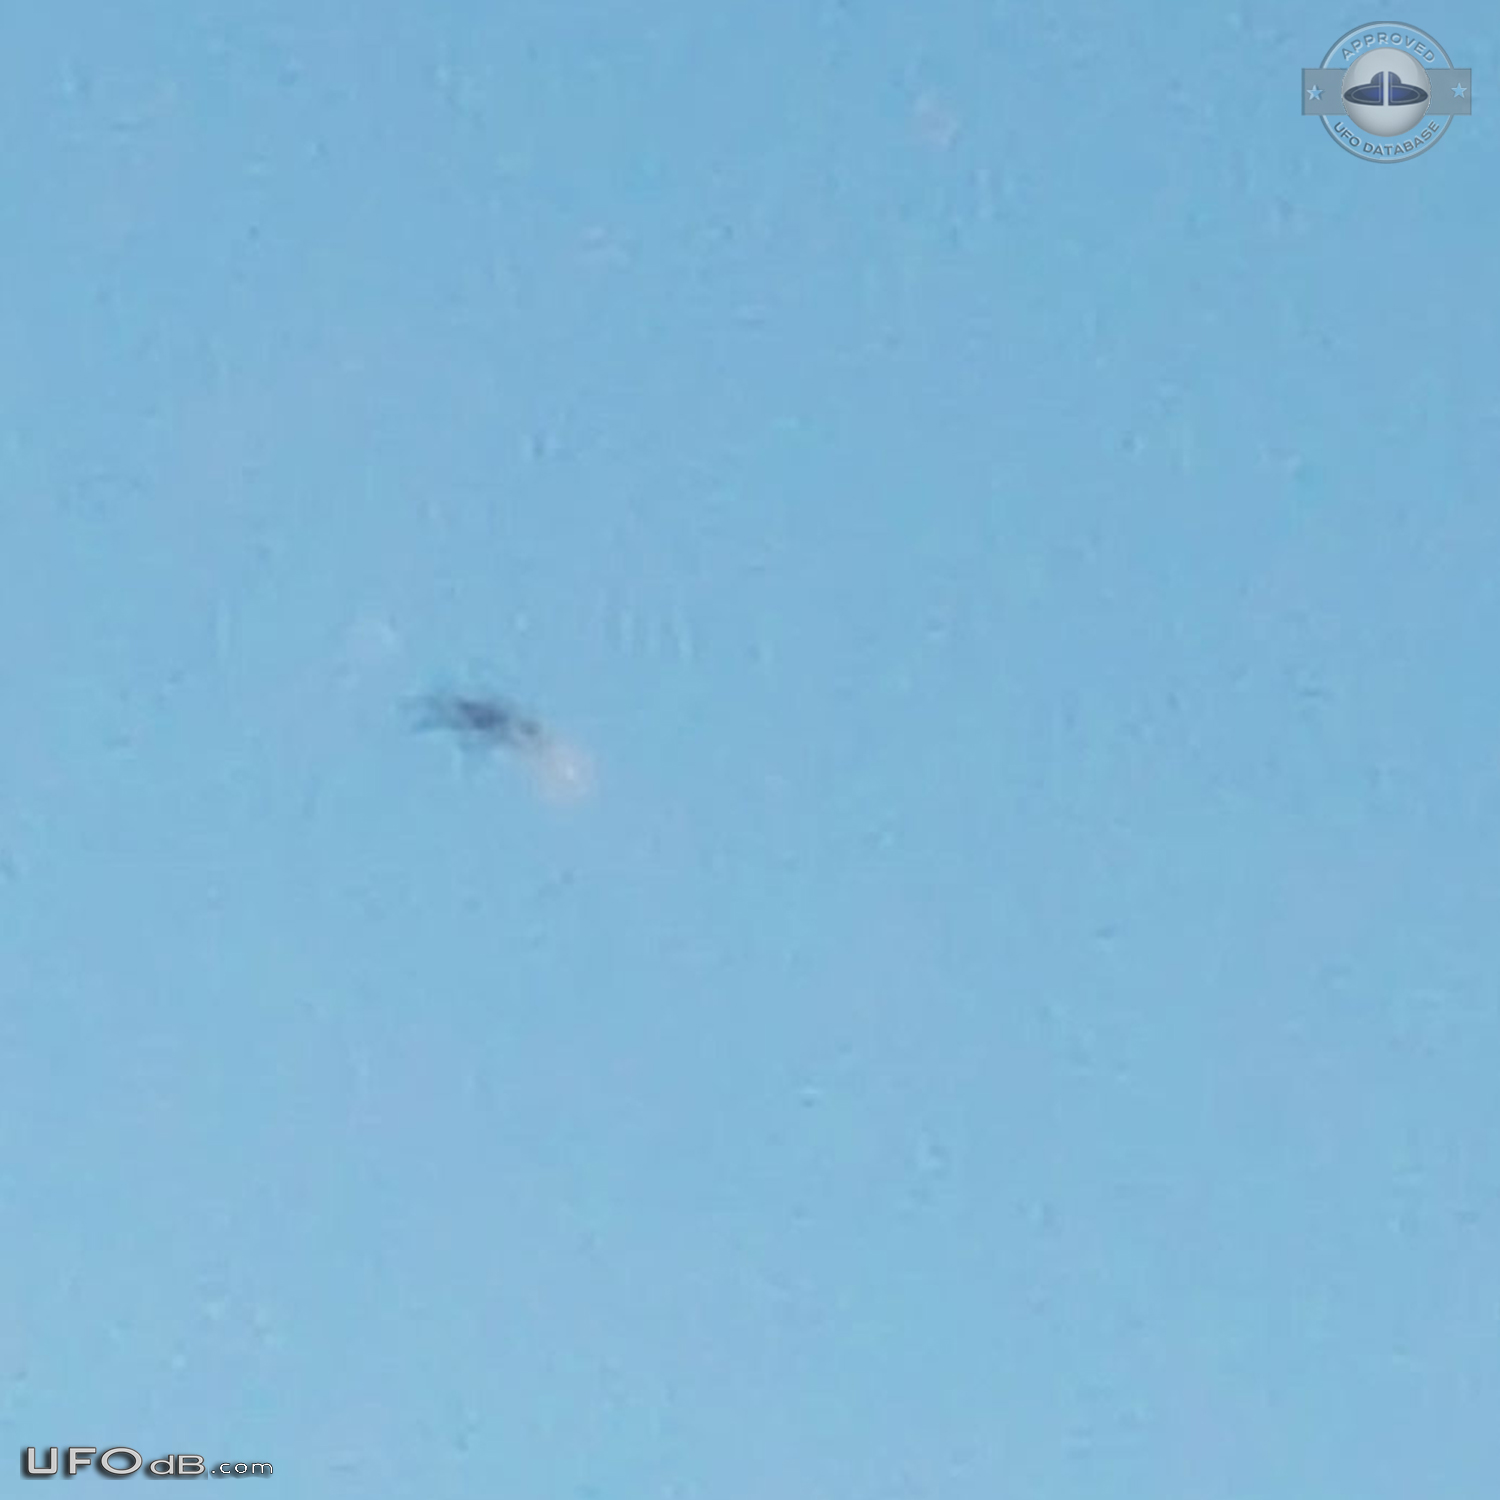 White trail with 45 angle - UFO going vertical - Derby England UK 2016 UFO Picture #777-2